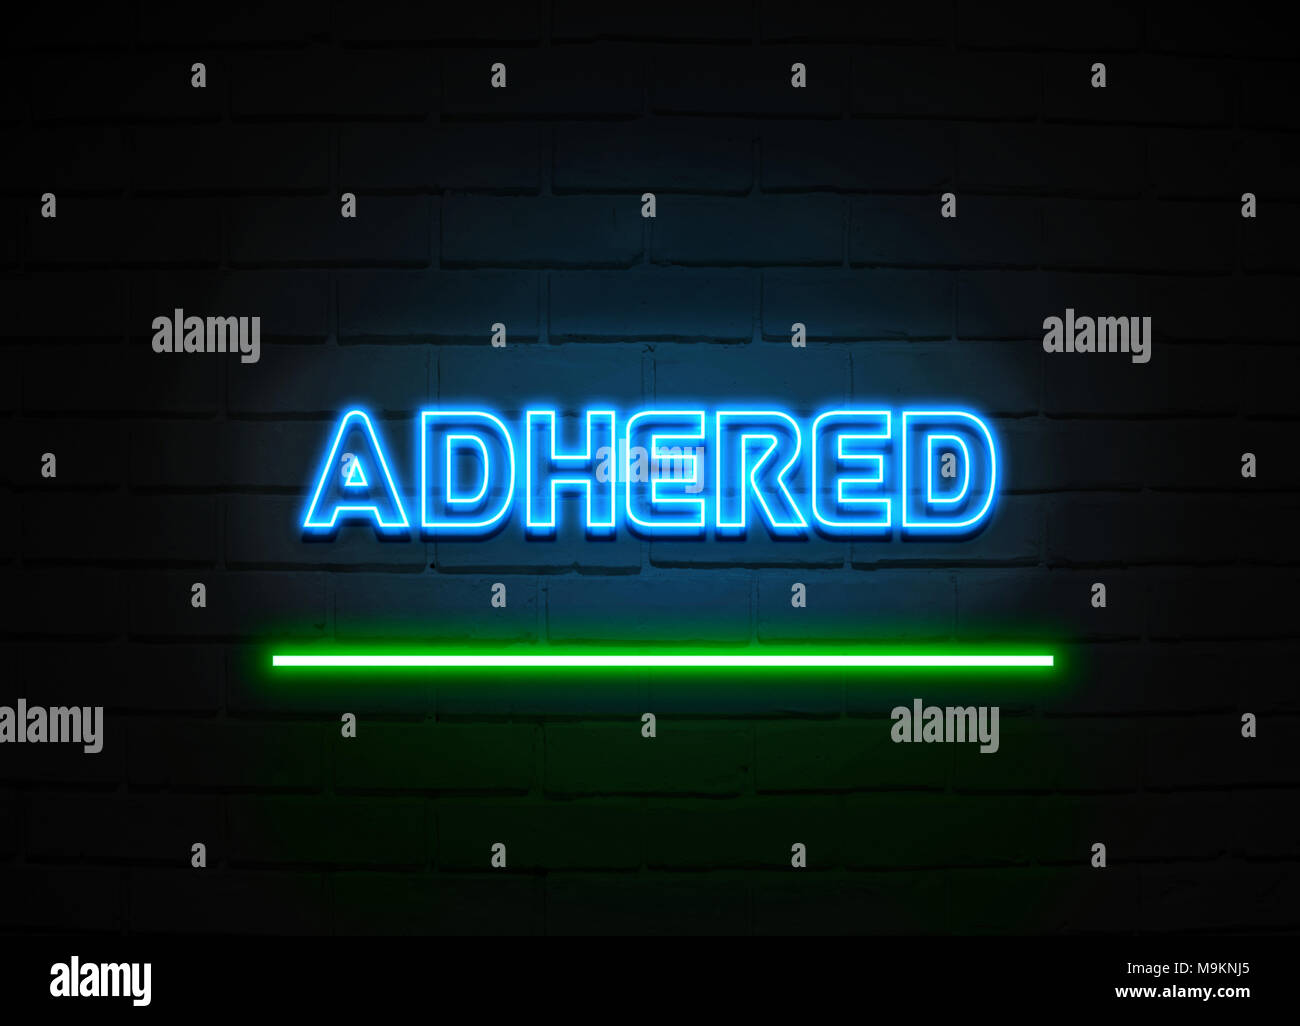 Adhered neon sign - Glowing Neon Sign on brickwall wall - 3D rendered royalty free stock illustration. Stock Photo